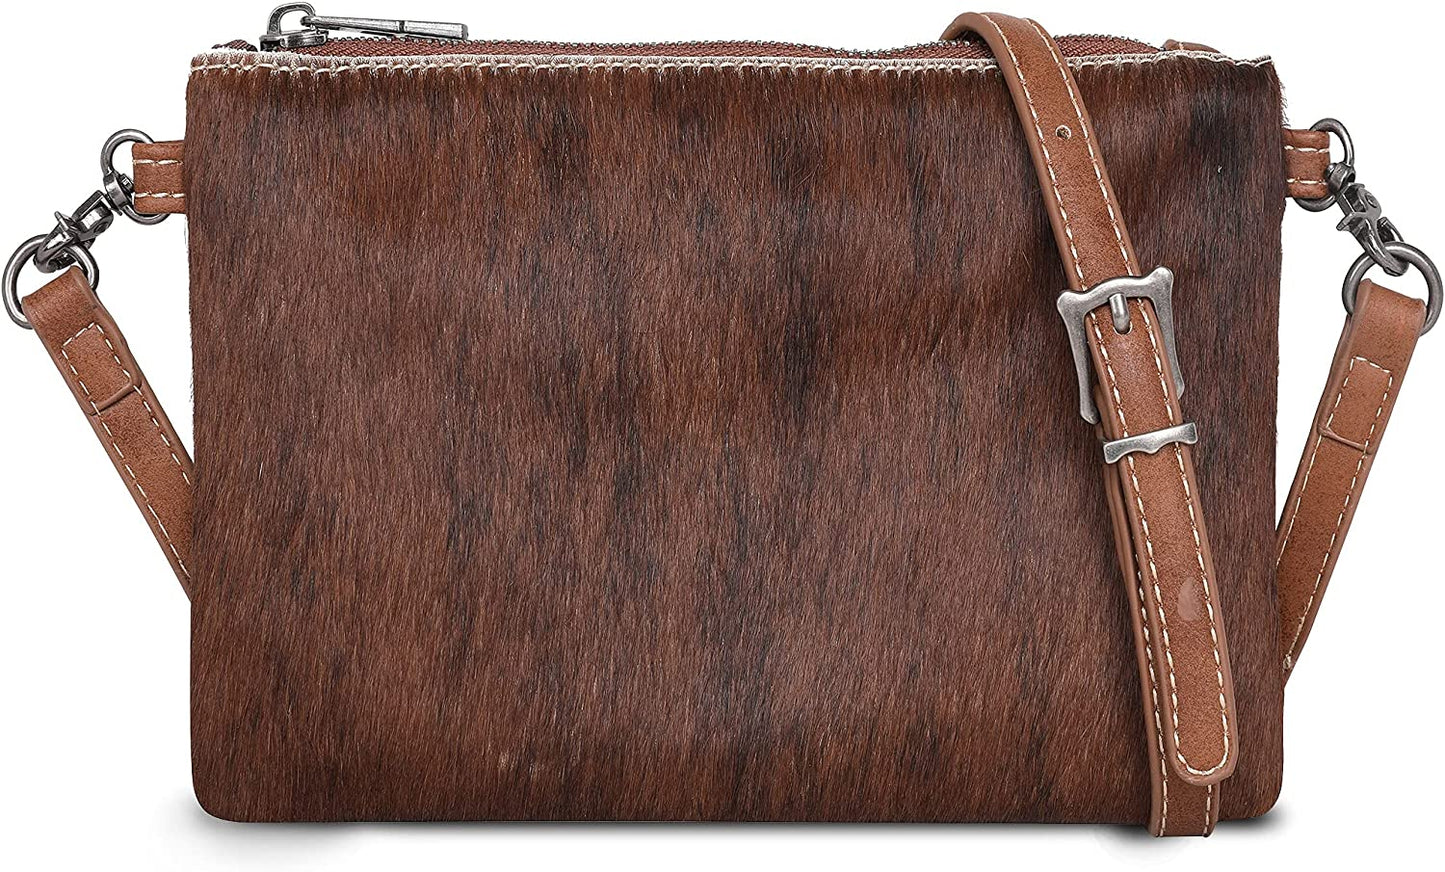 Montana West Cowhair Leather Crossbody Bag Cell Phone Purse Wallet